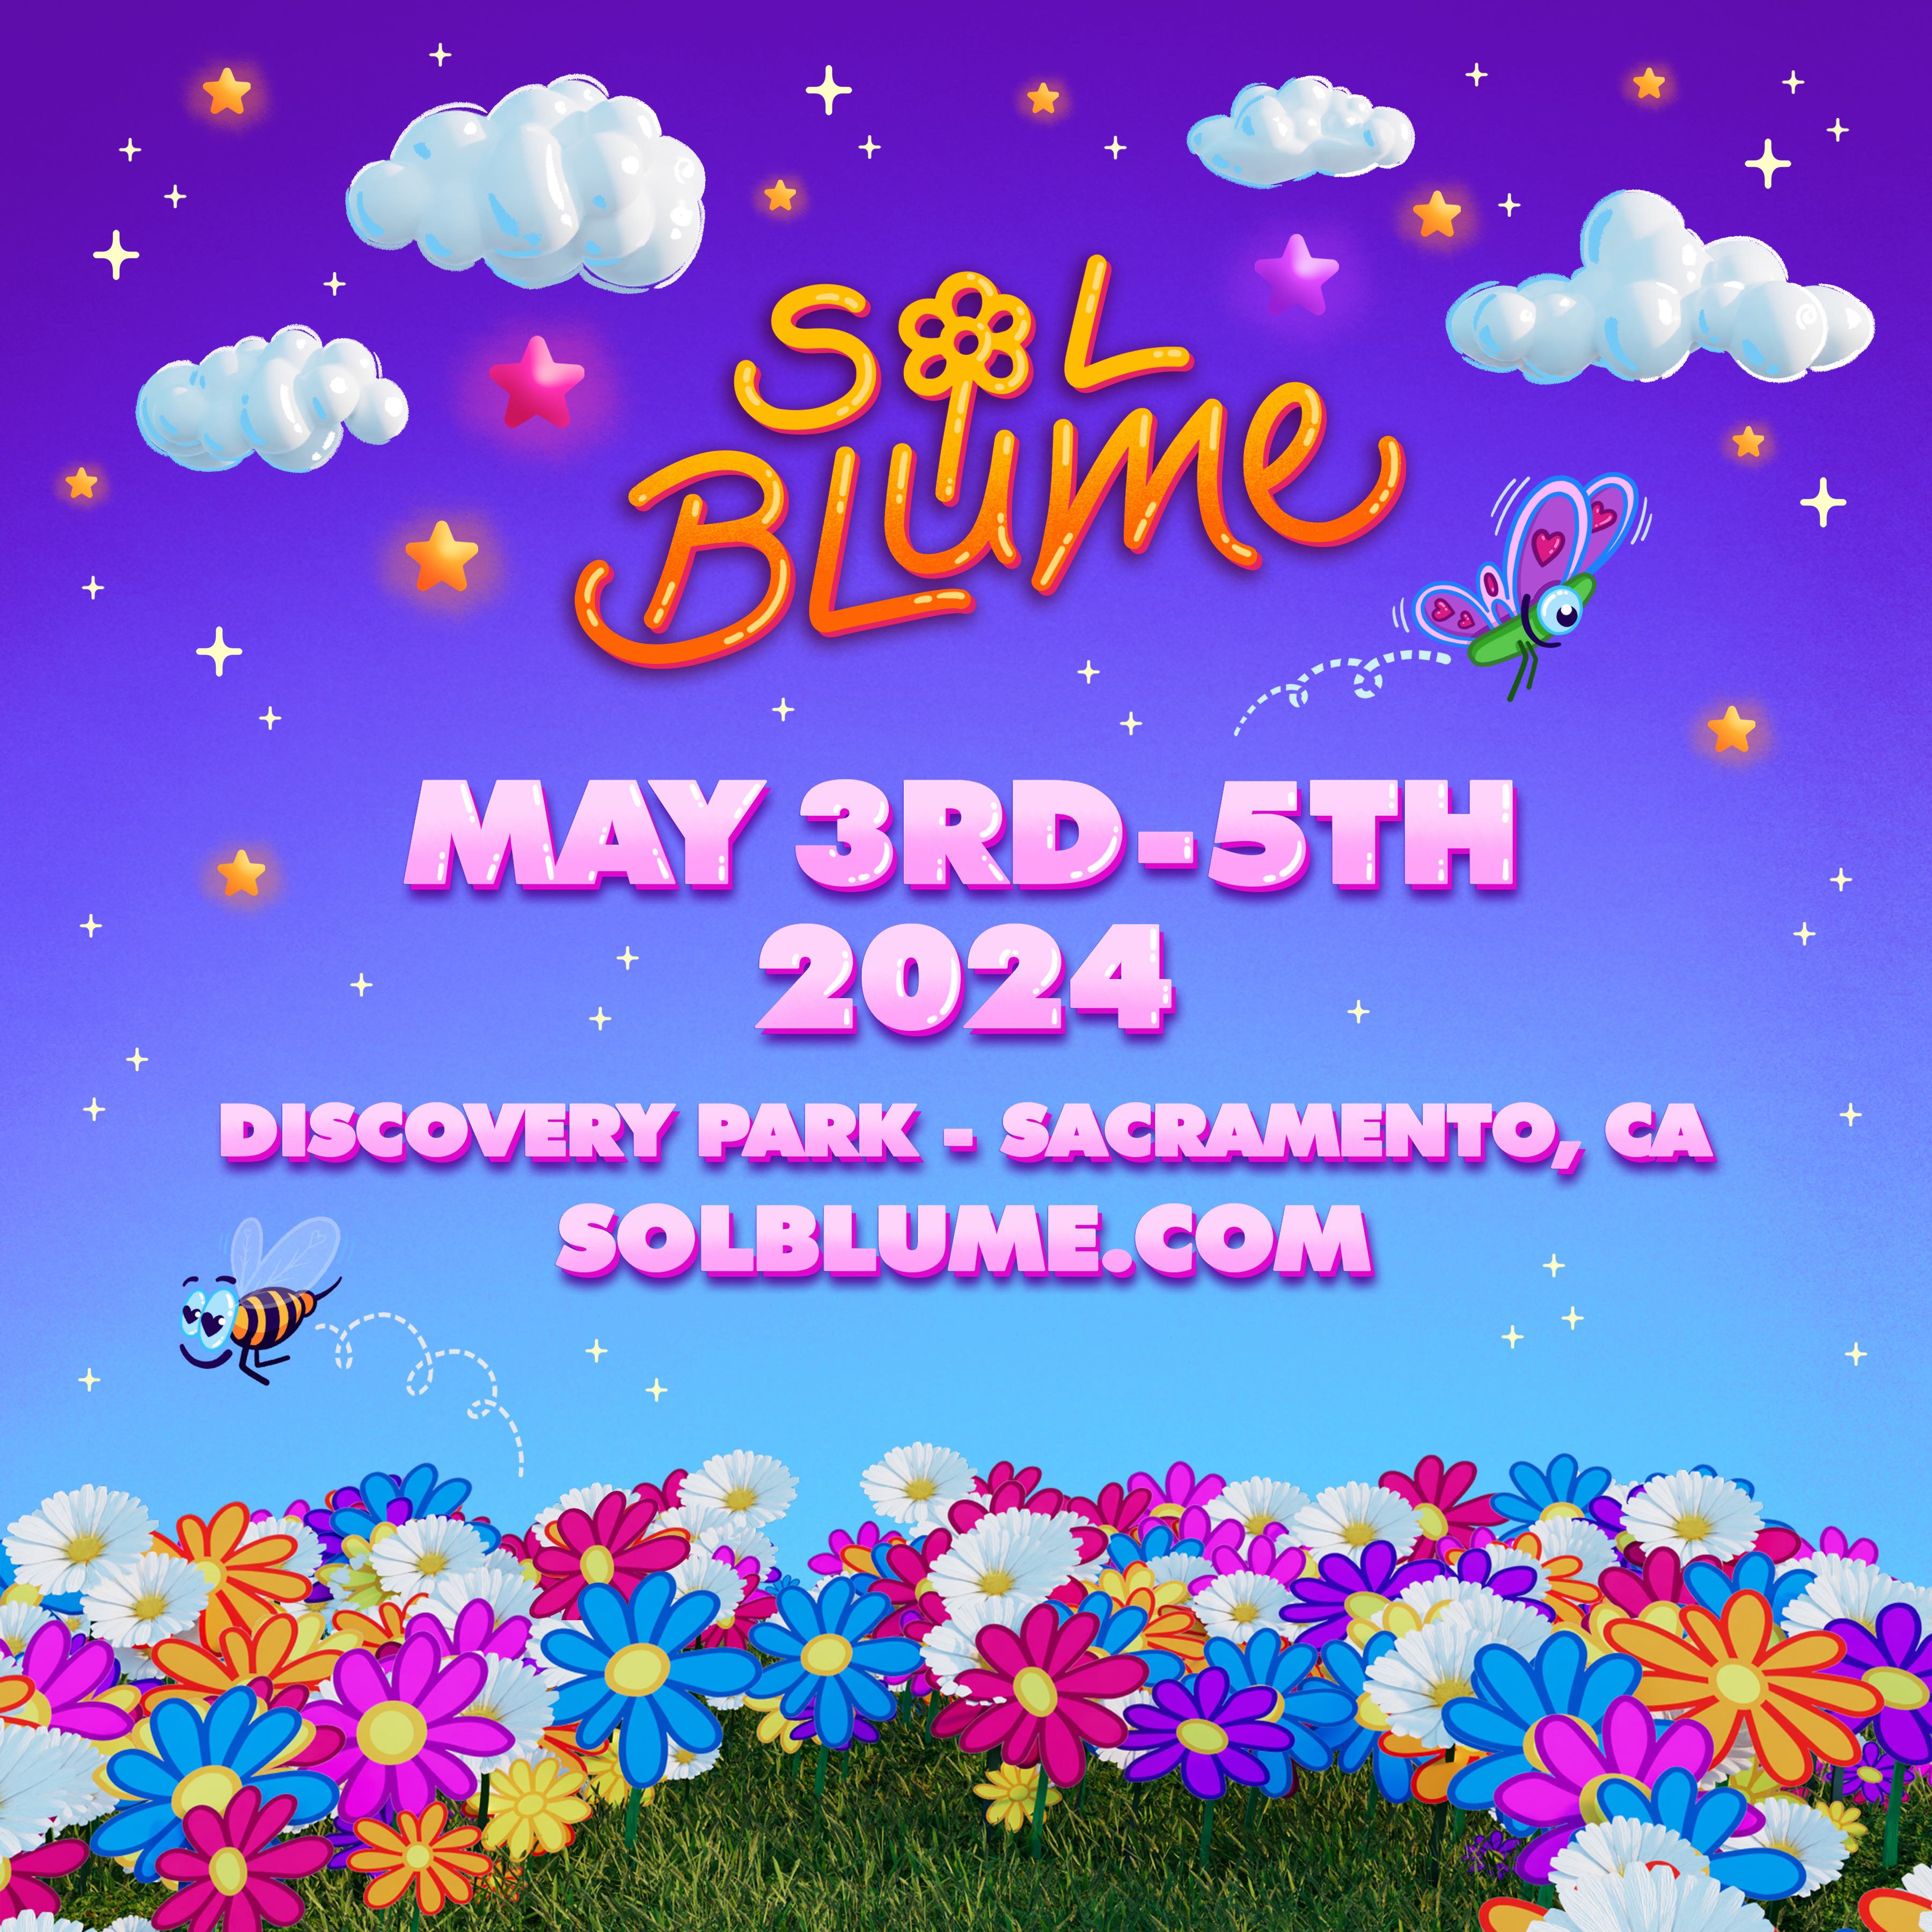 SOL BLUME MUSIC FESTIVAL ANNOUNCES 2024 DATES WITH EXPANSION TO THREE